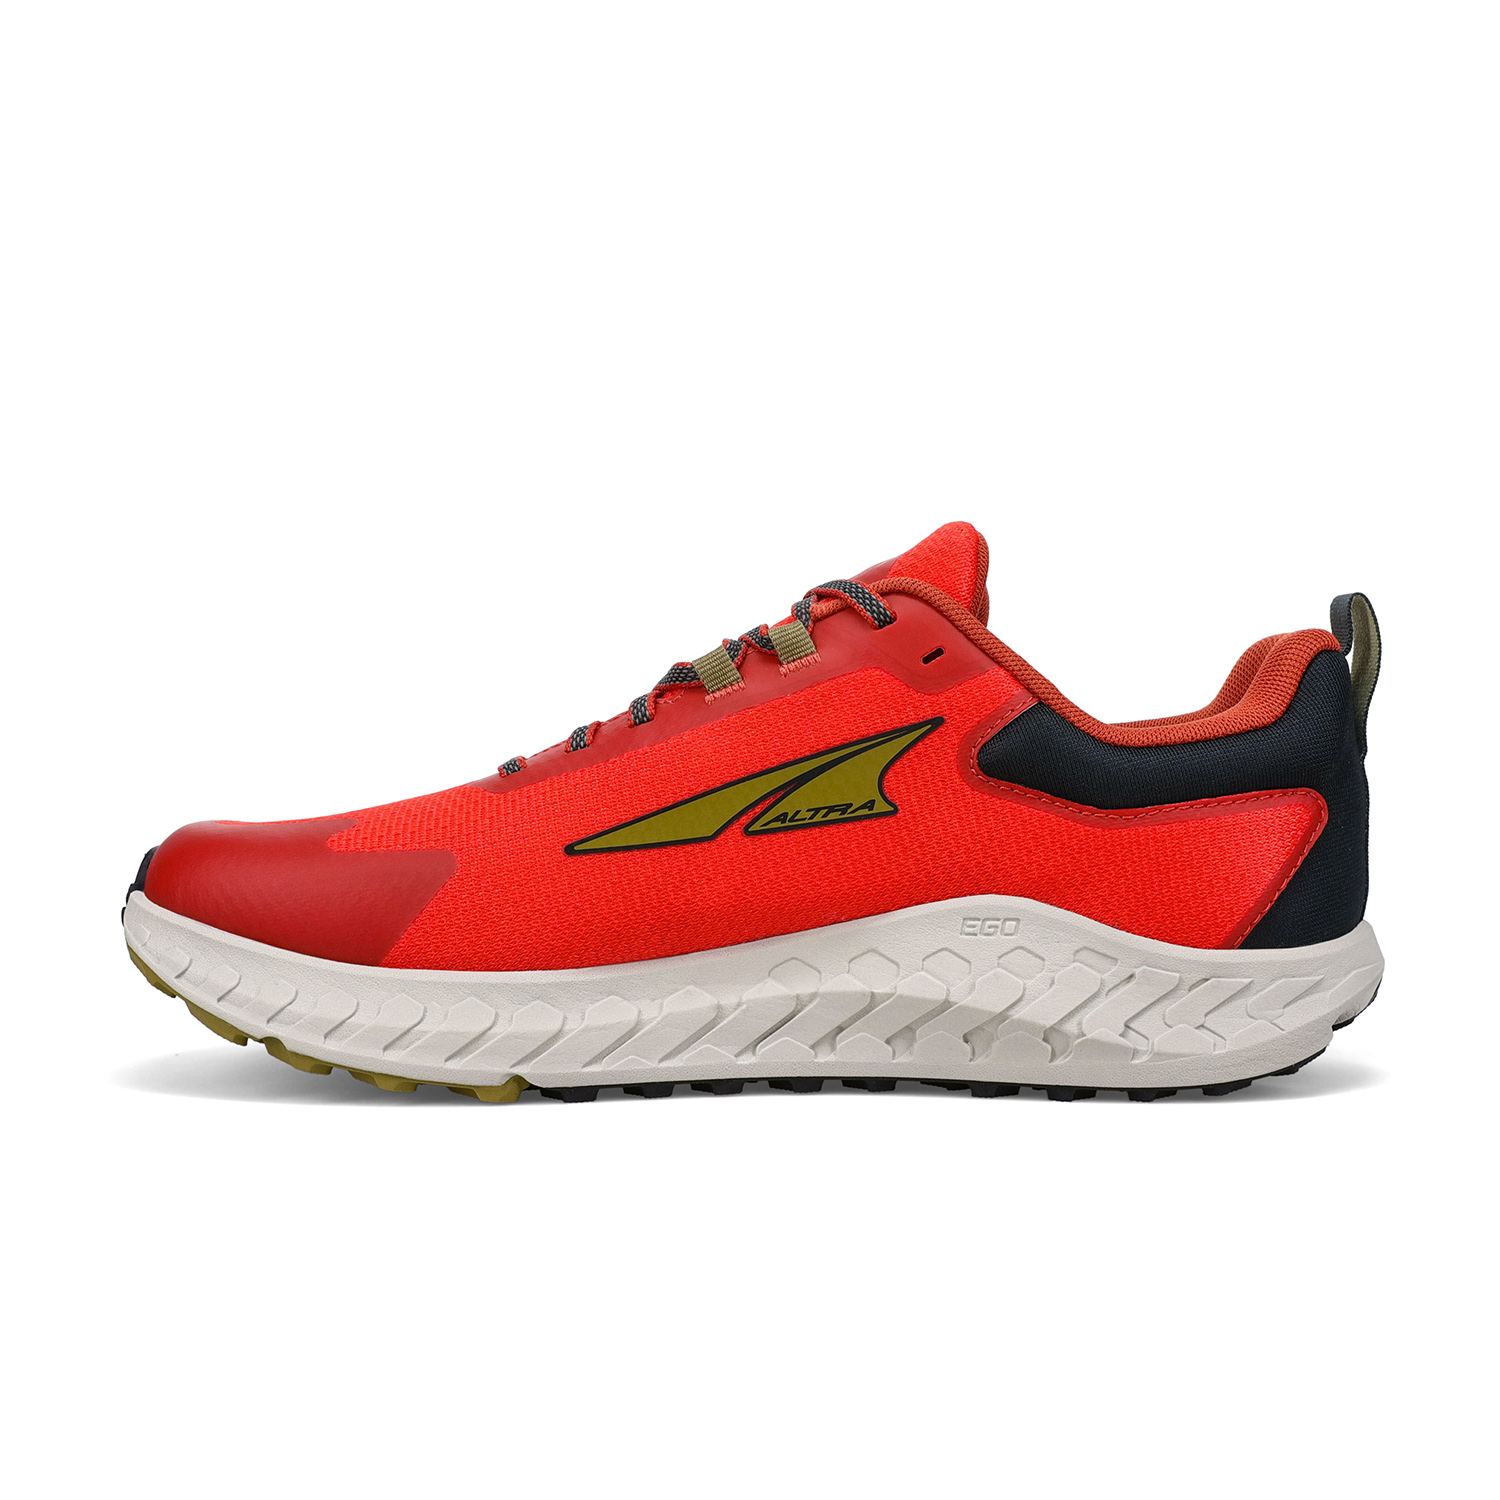 Altra Outroad 2 - Black/Red